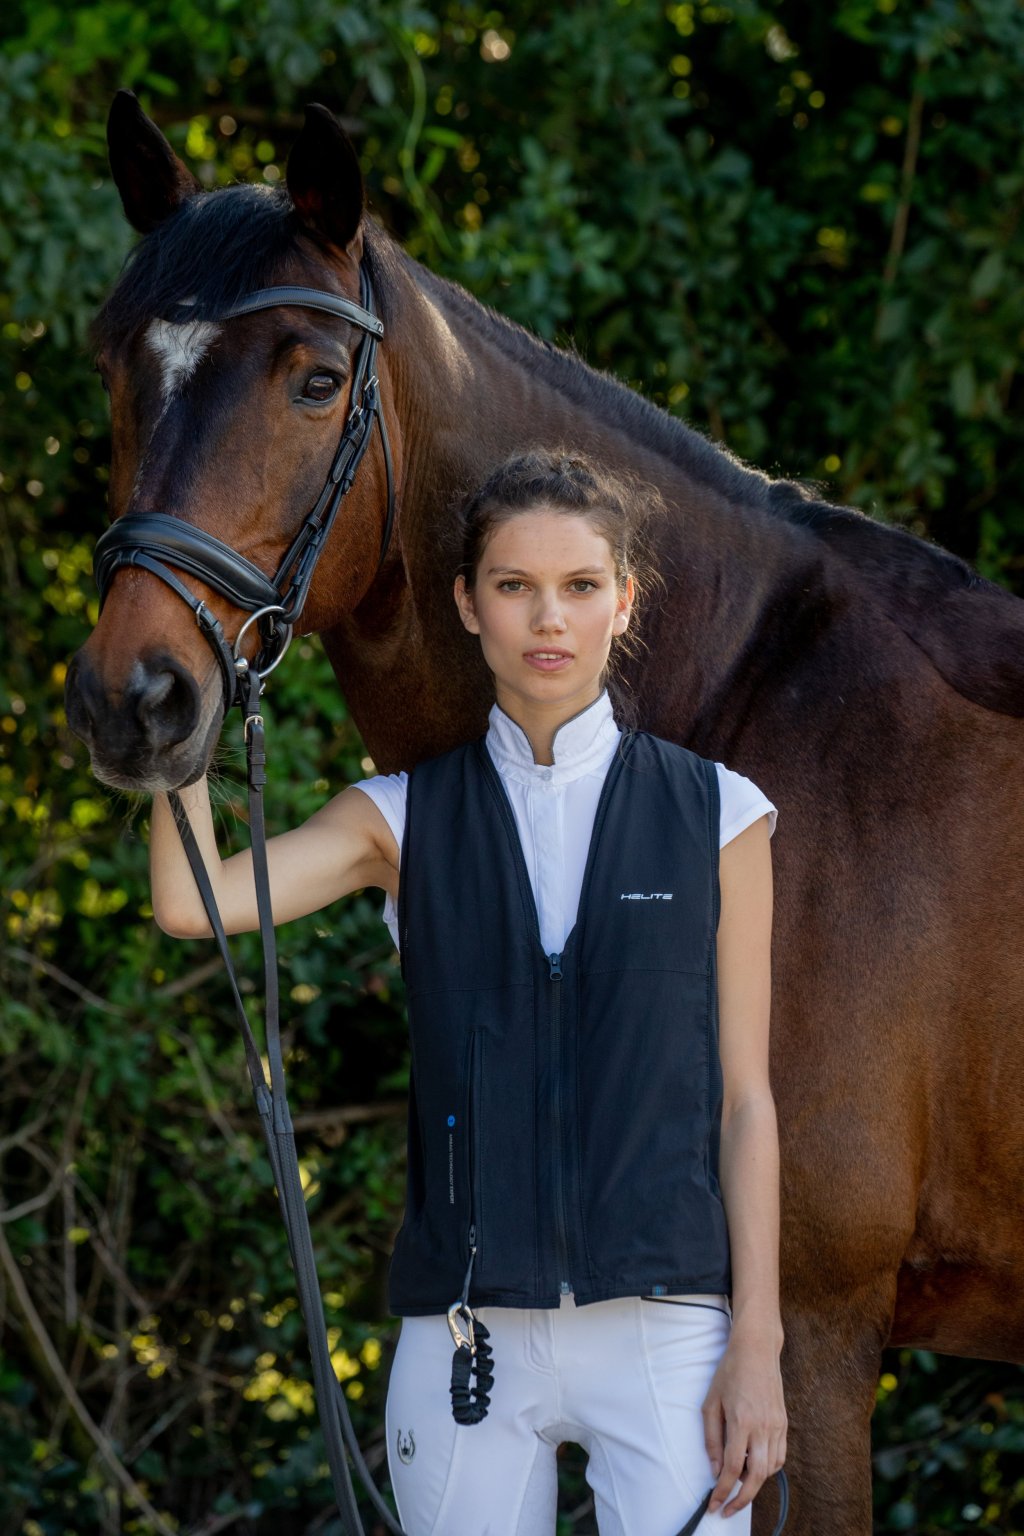 Normalizing Equestrian Safety With Airbag Vests